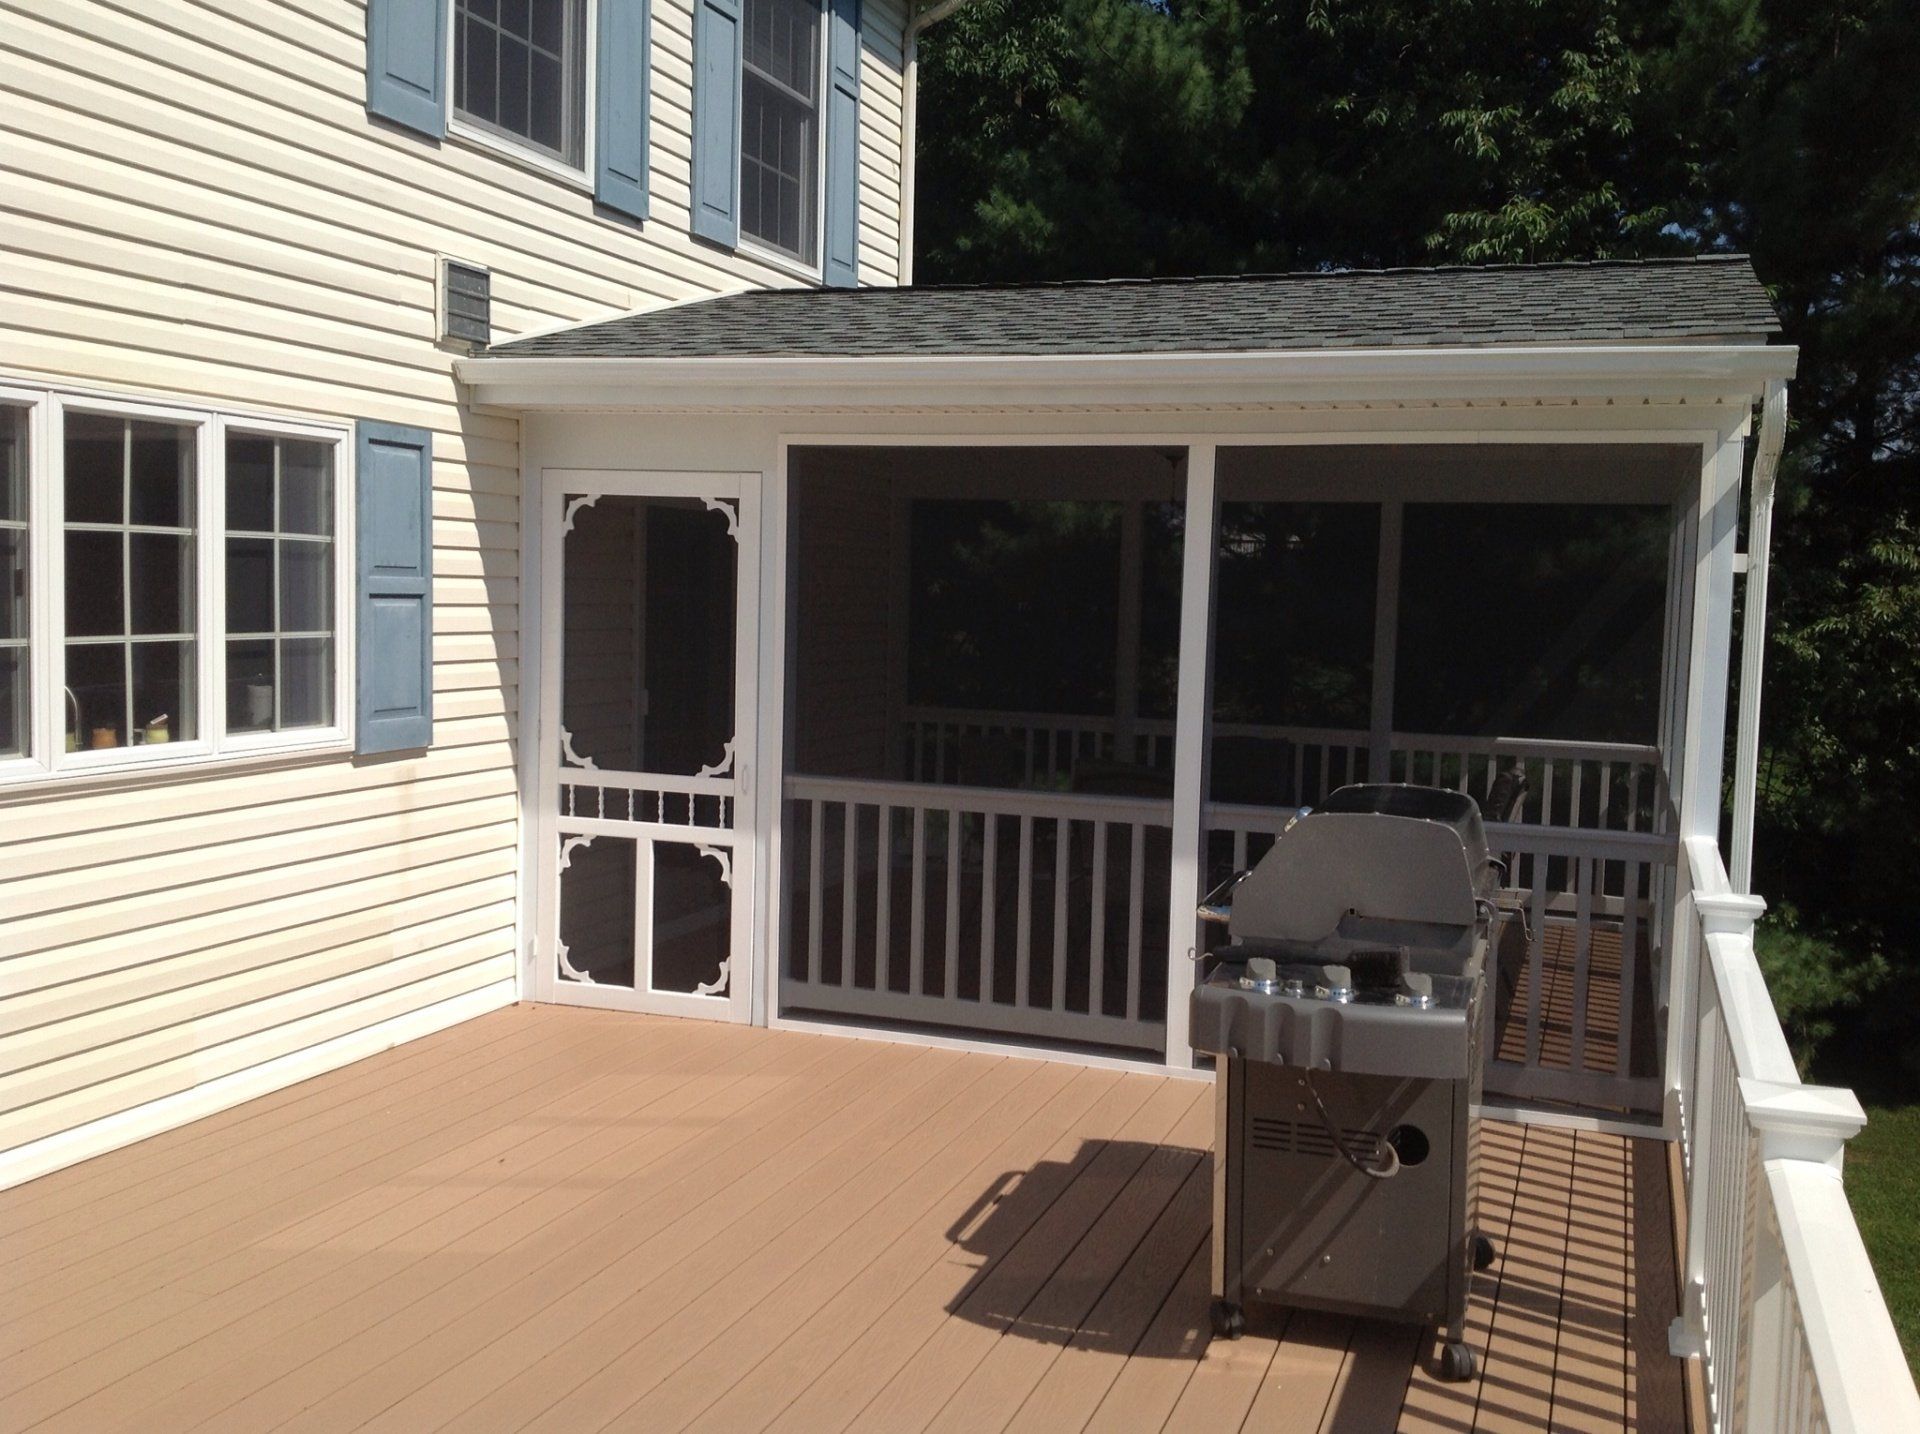 House Siding - Home Improvement Services in Glen Arm, MD